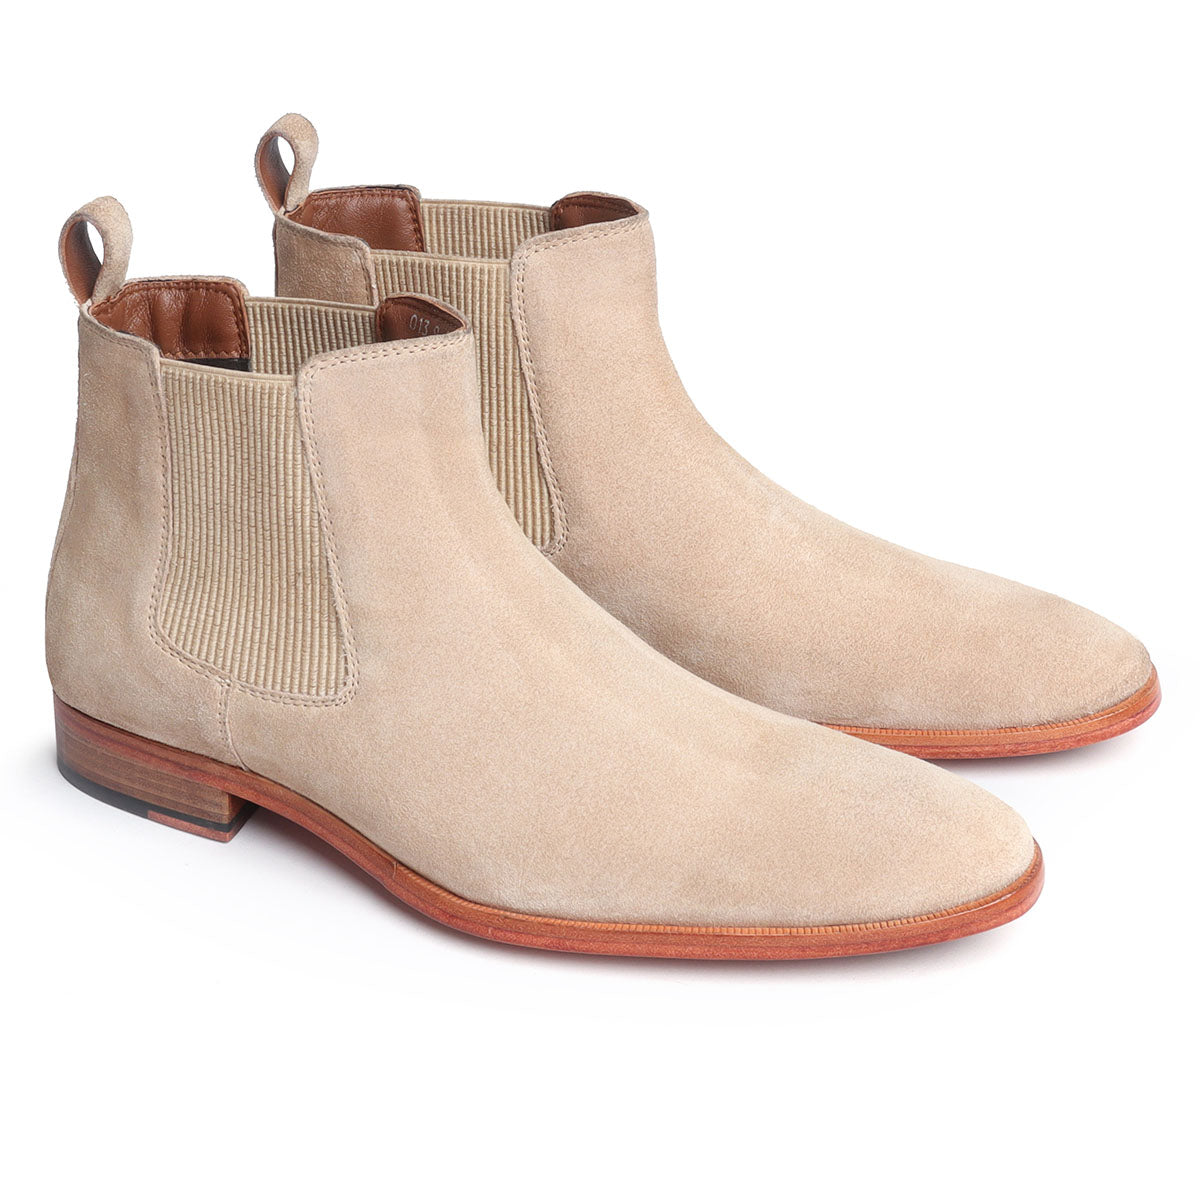 Beige Suede leather Chelsea boots with 